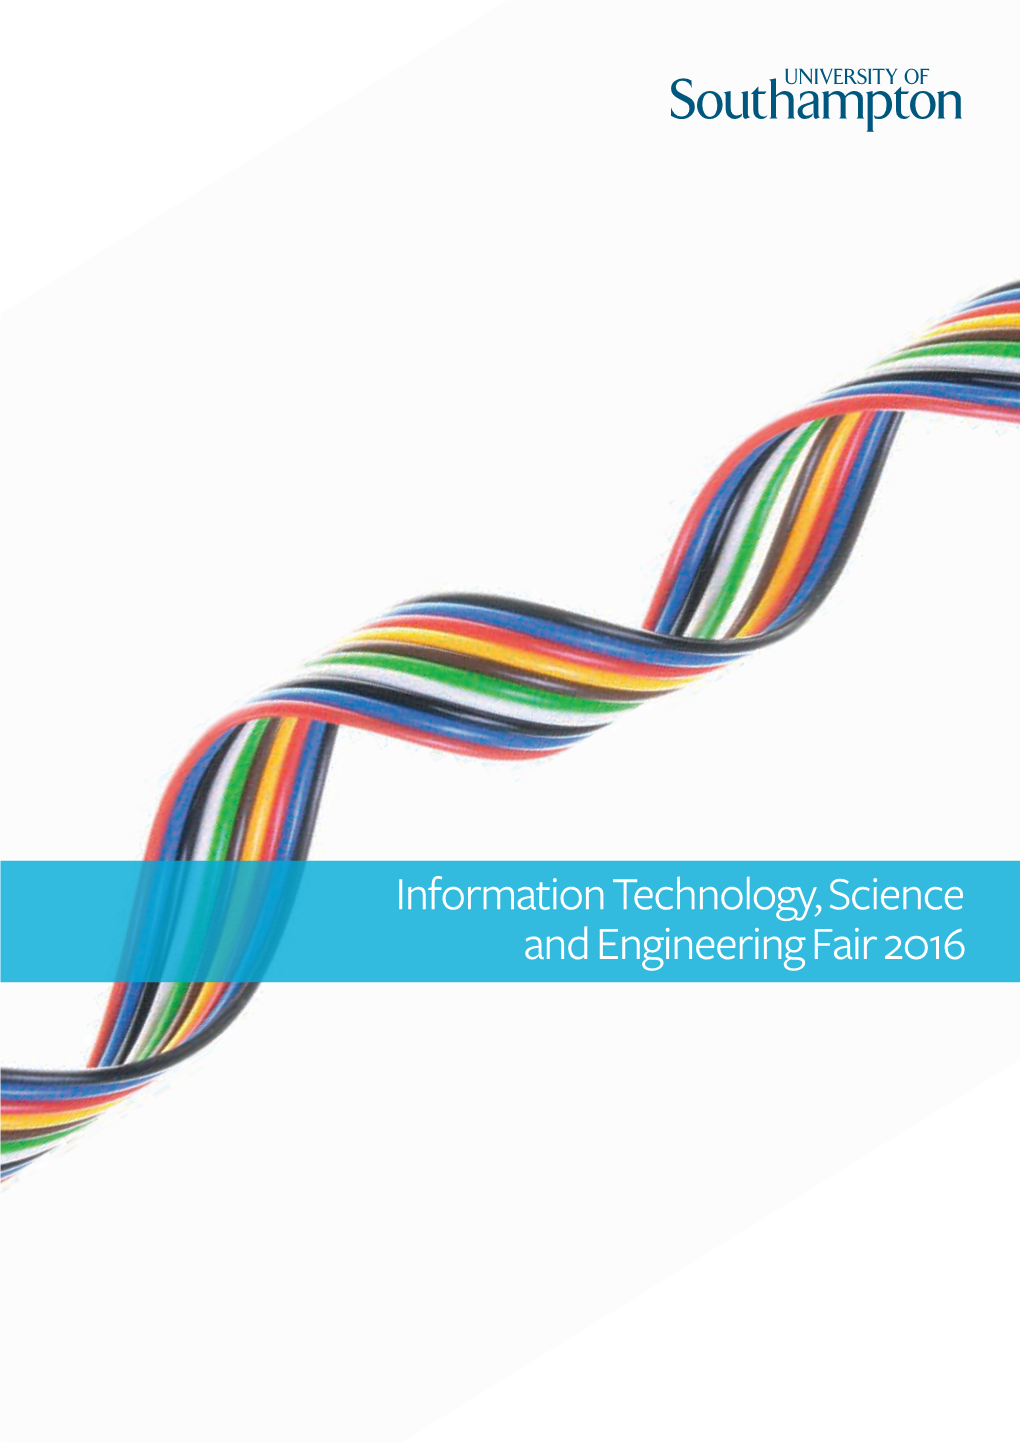 Information Technology, Science and Engineering Fair 2016 Contents